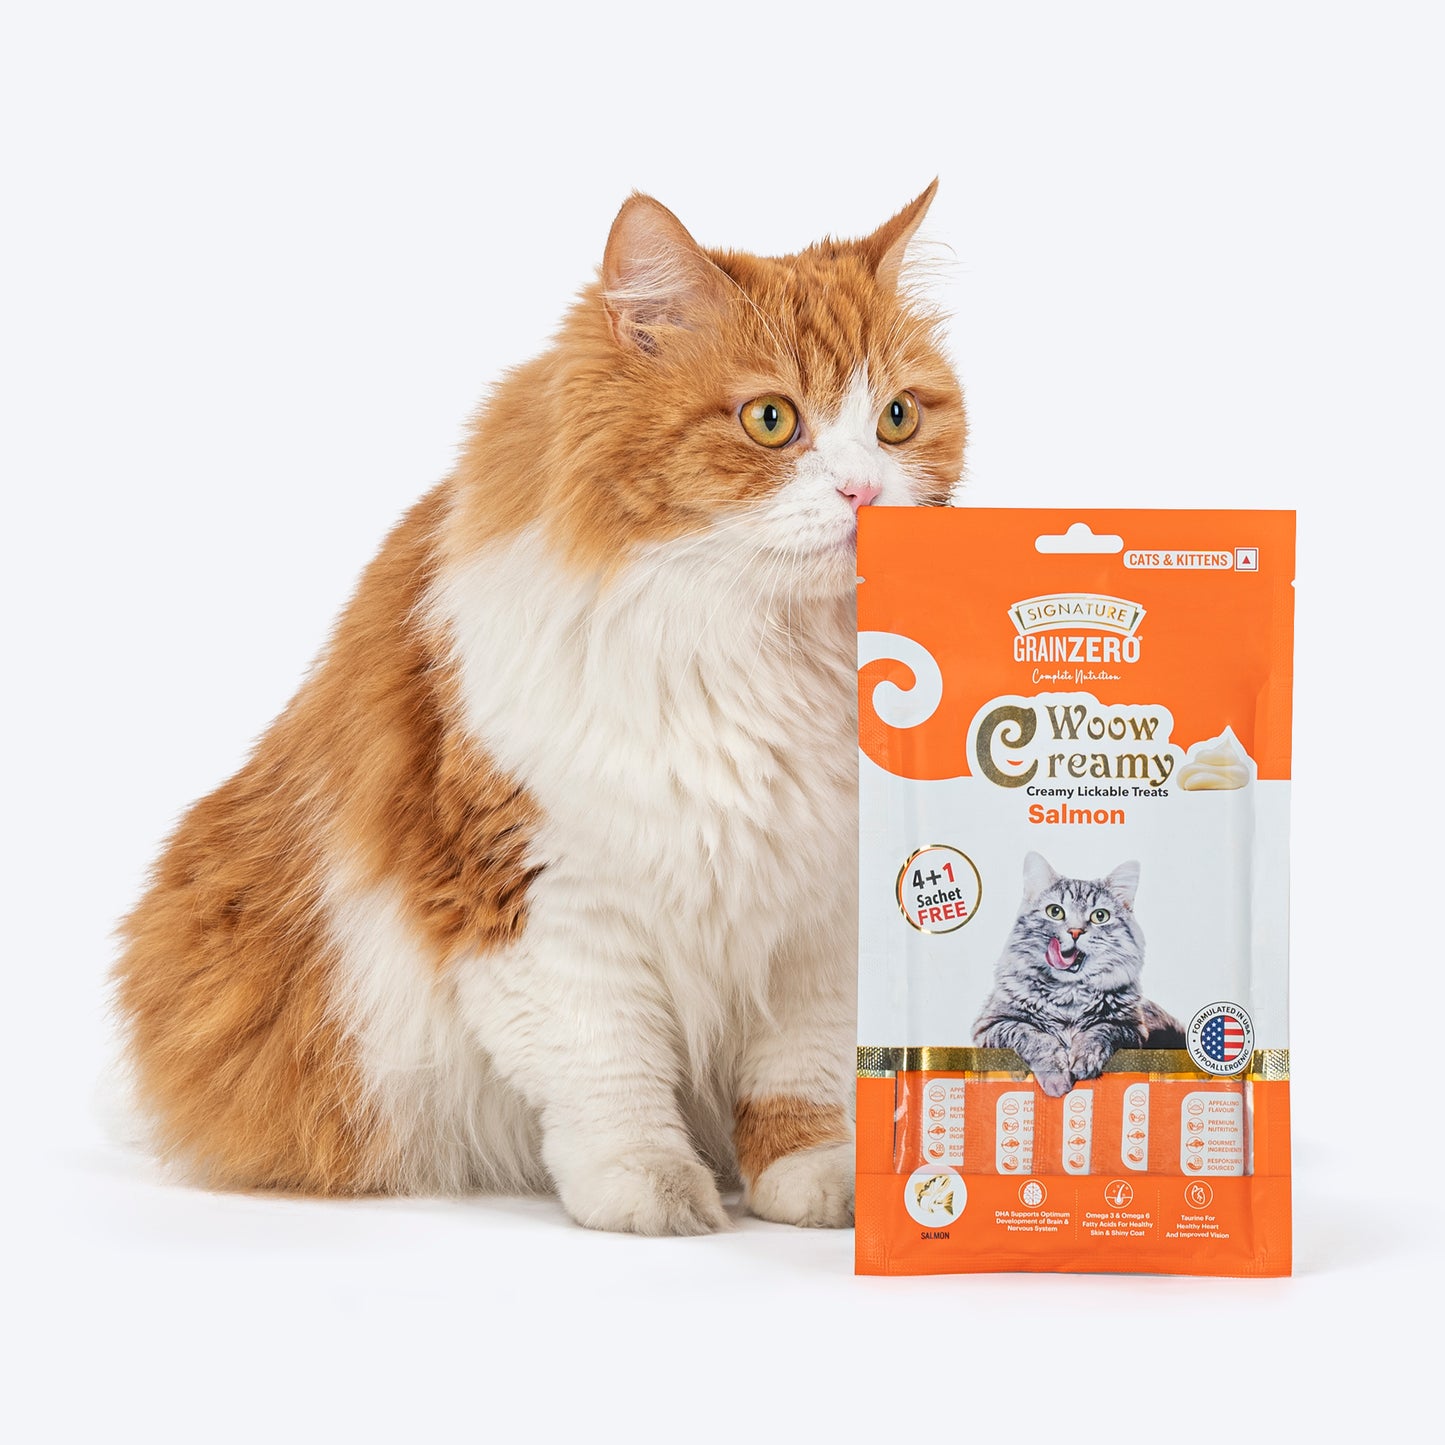 Signature Grain Zero Woow Creamy Salmon Lickable Treats For Cat & Kitten - 75 g - Heads Up For Tails